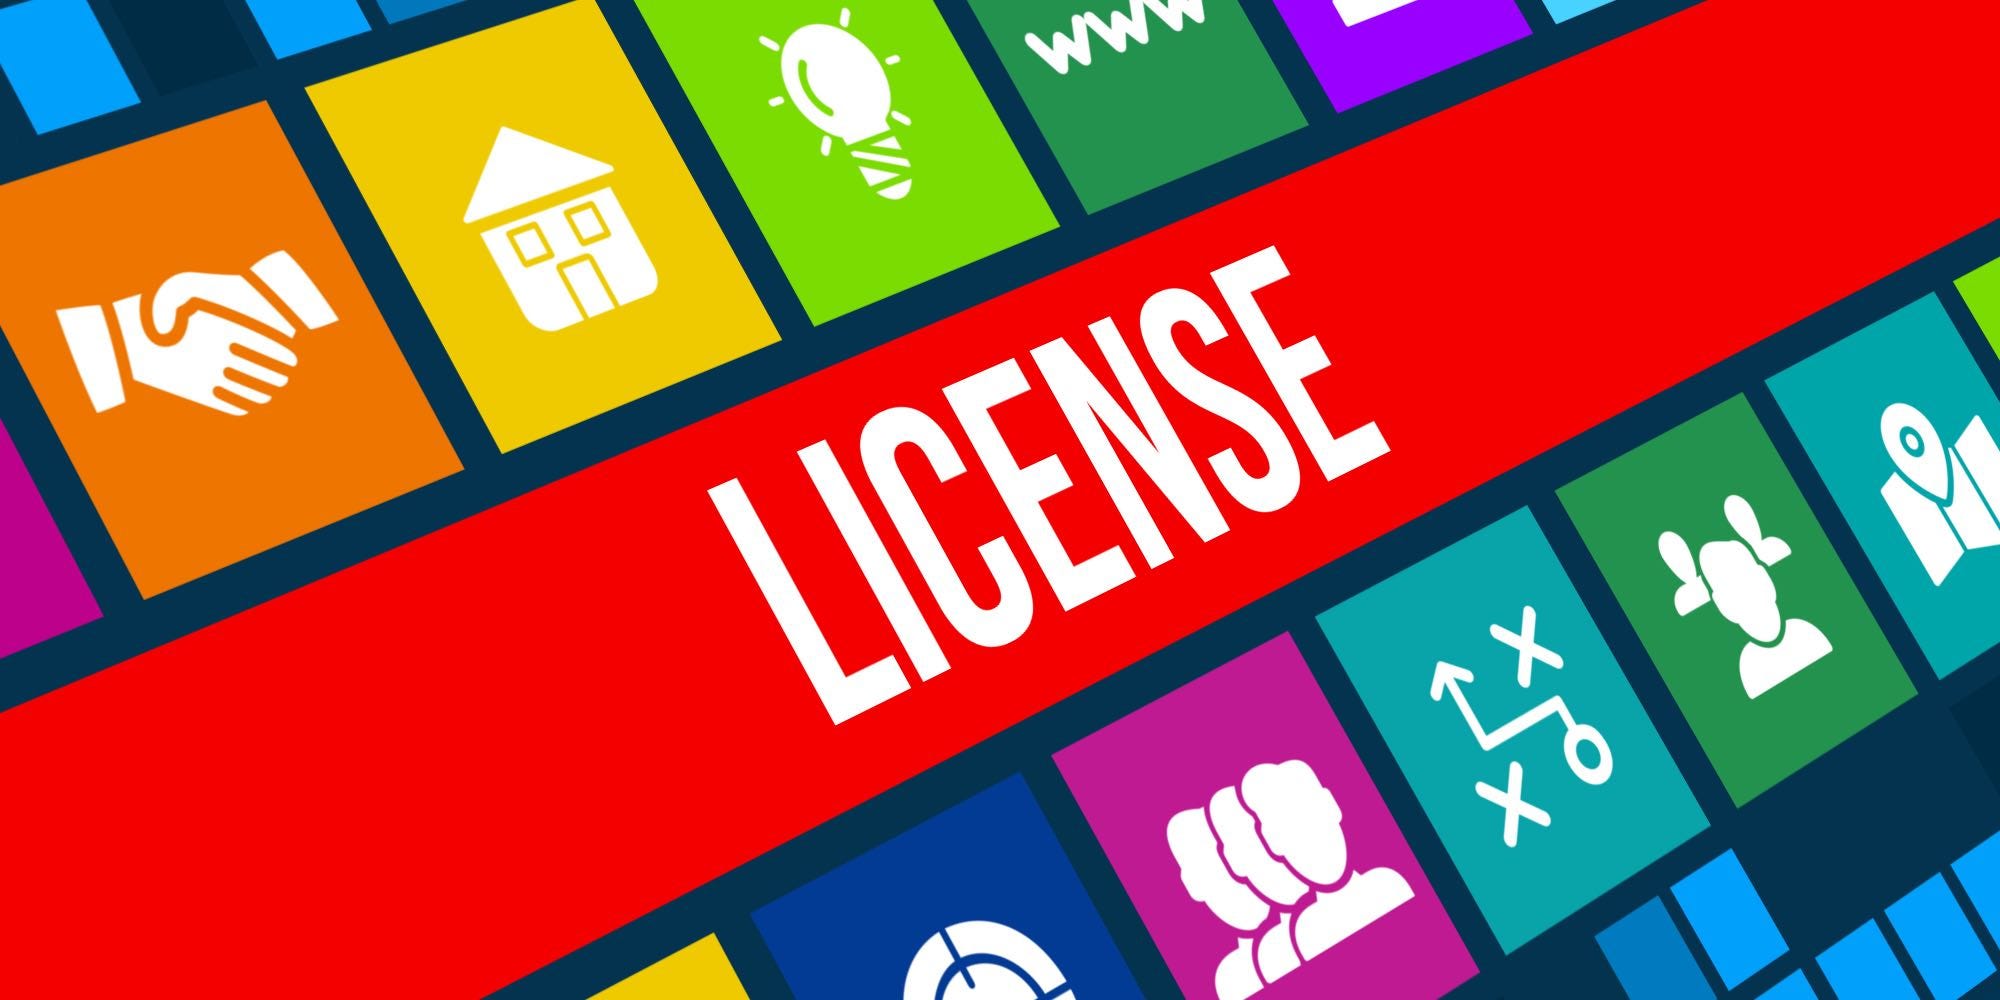 How To Get Money Transmitter License Coverage For Your Startup - money transmitter license